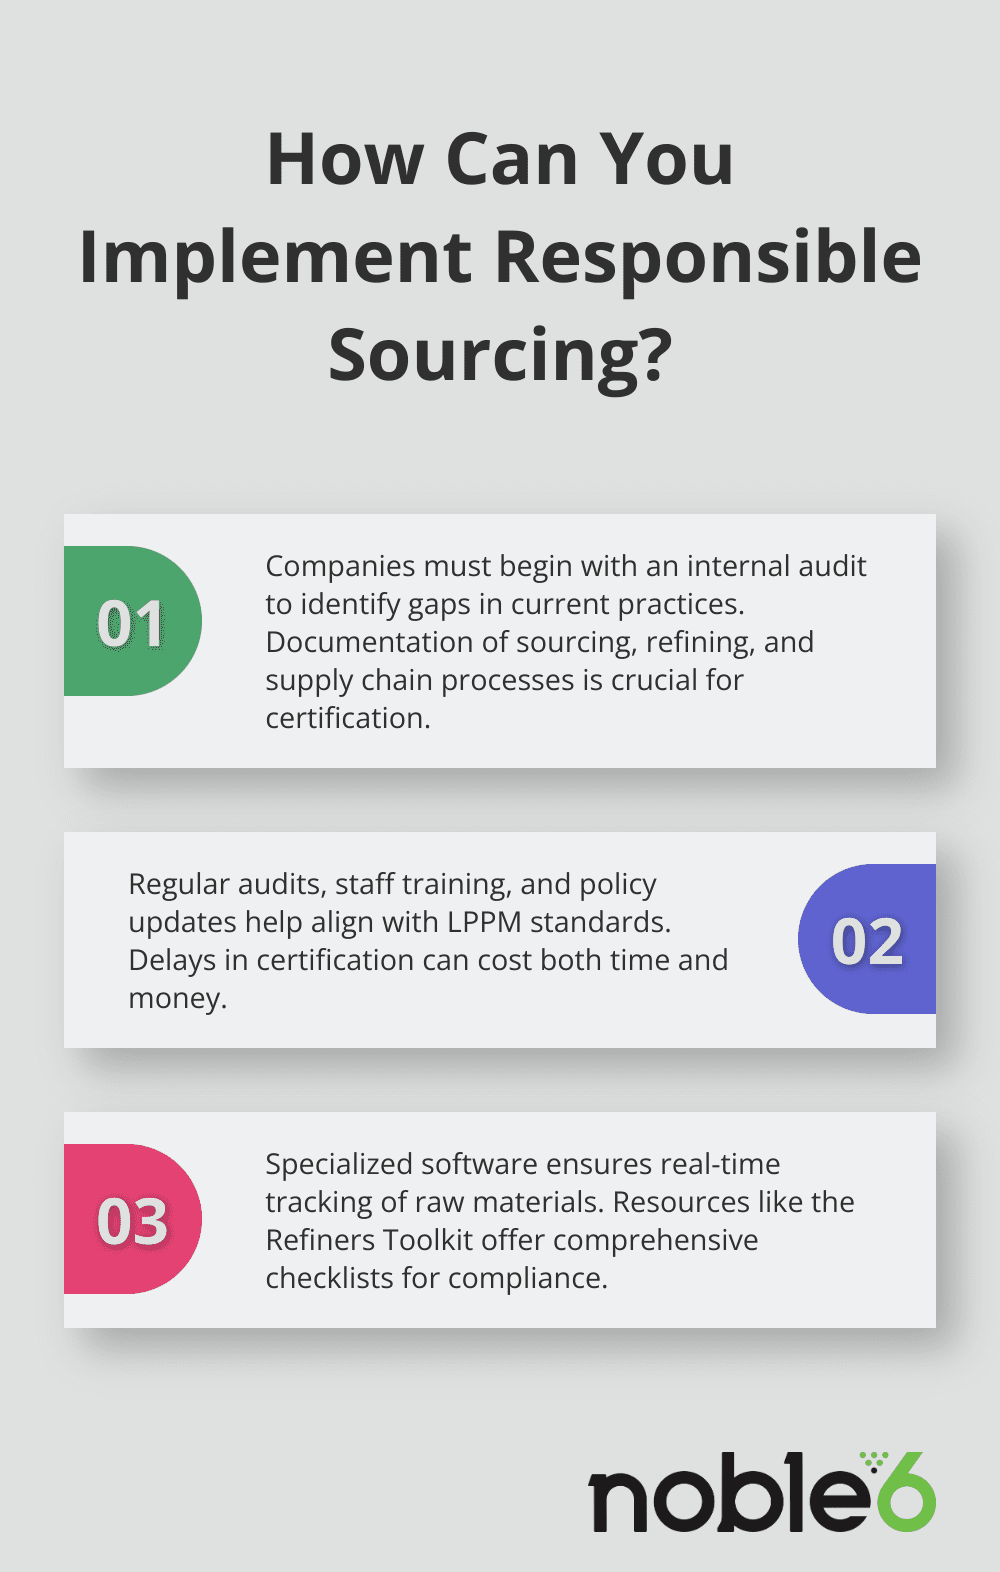 Fact - How Can You Implement Responsible Sourcing?